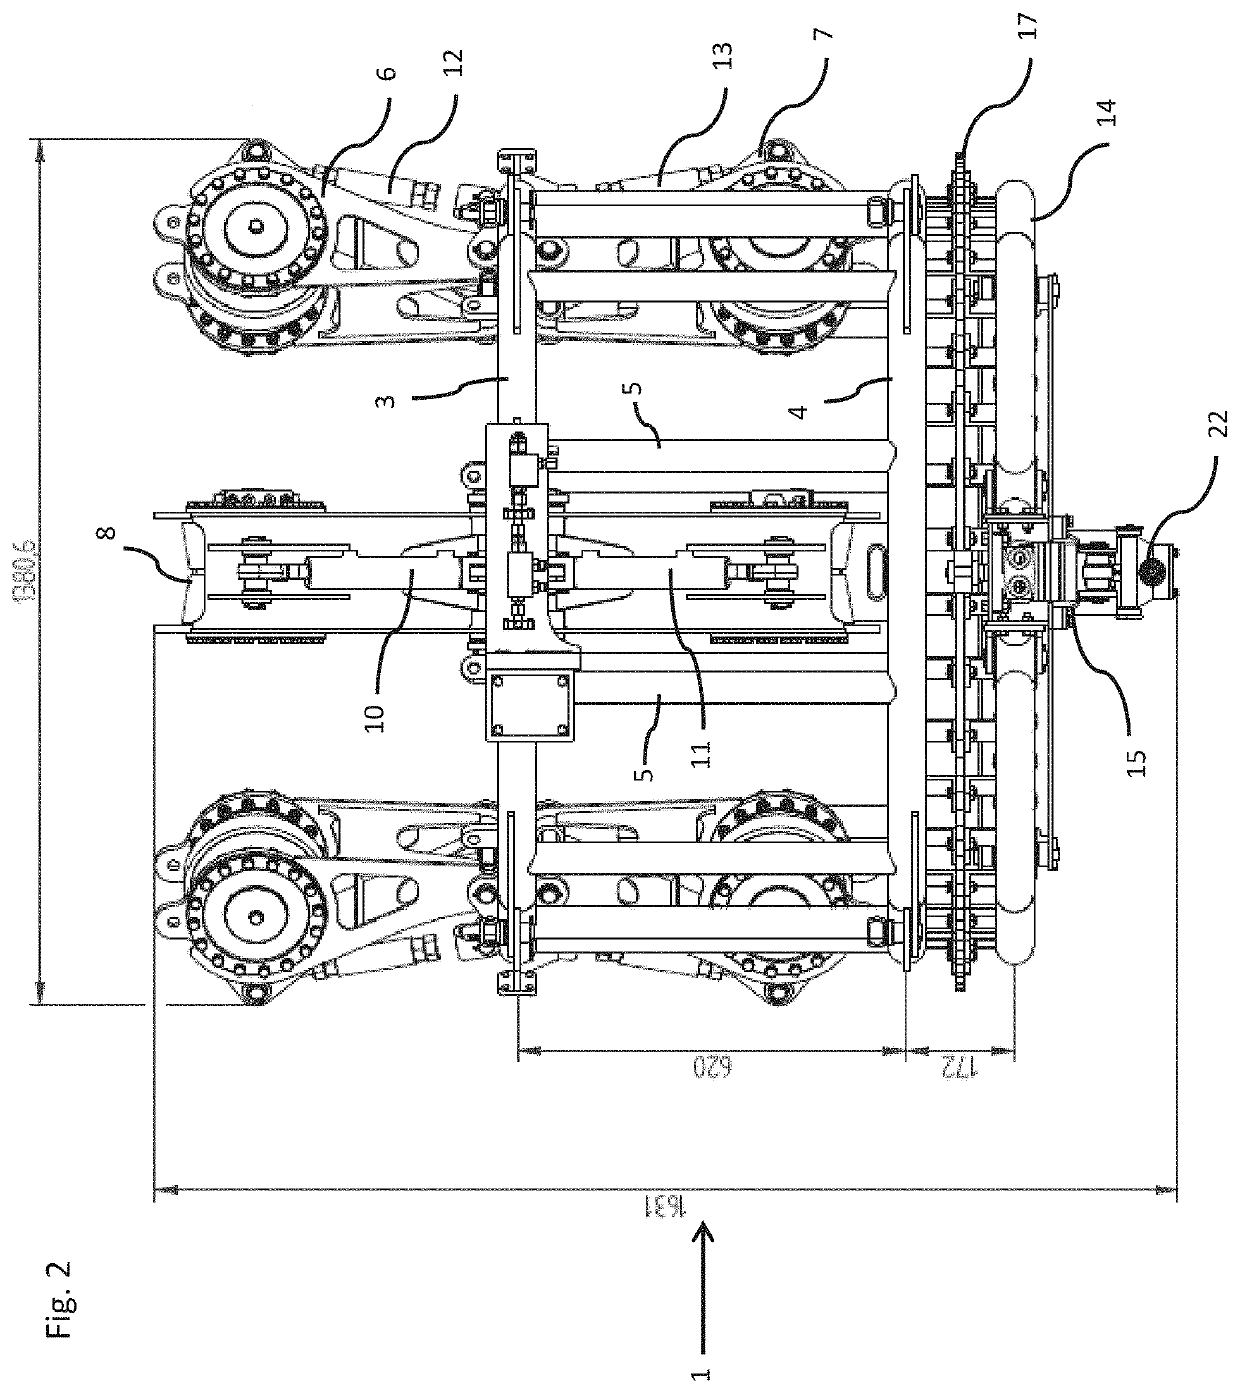 Apparatus for Servicing a Structure